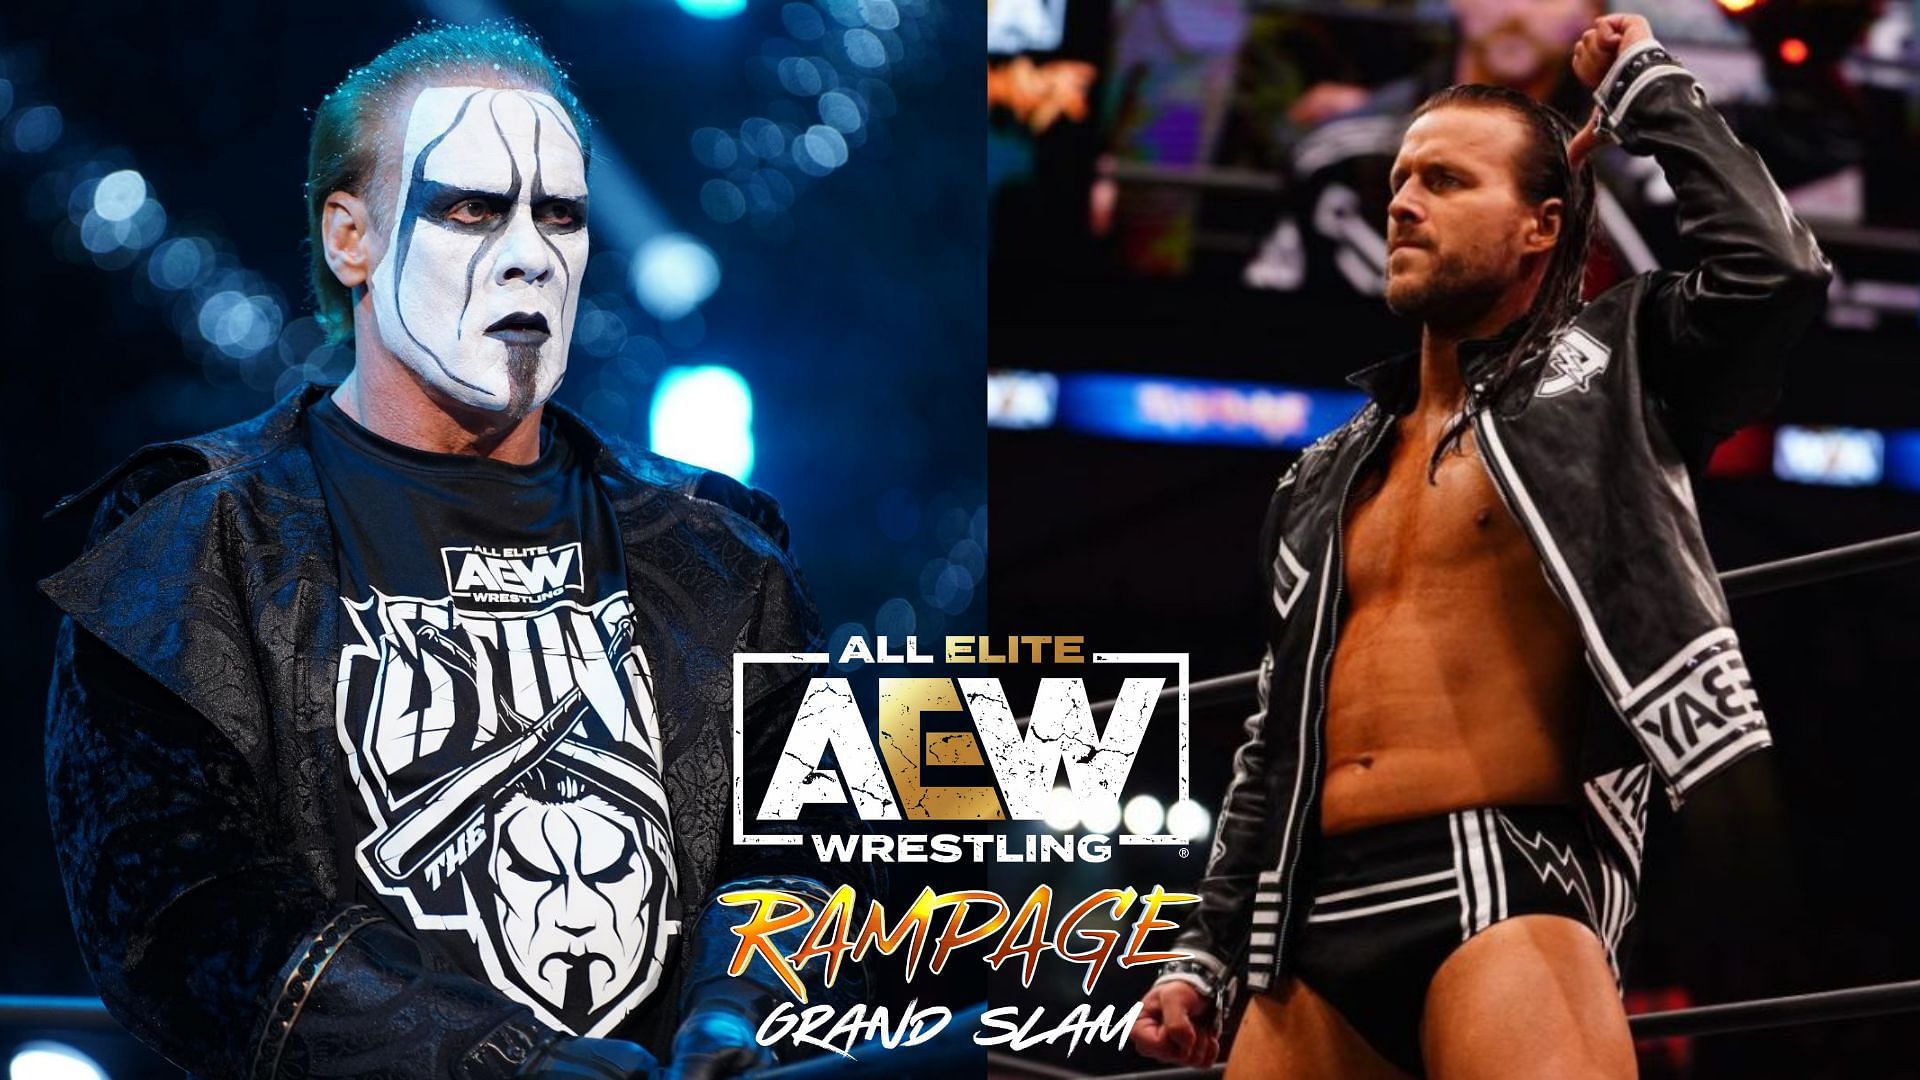 Predicting what might happen at AEW Rampage: Grand Slam